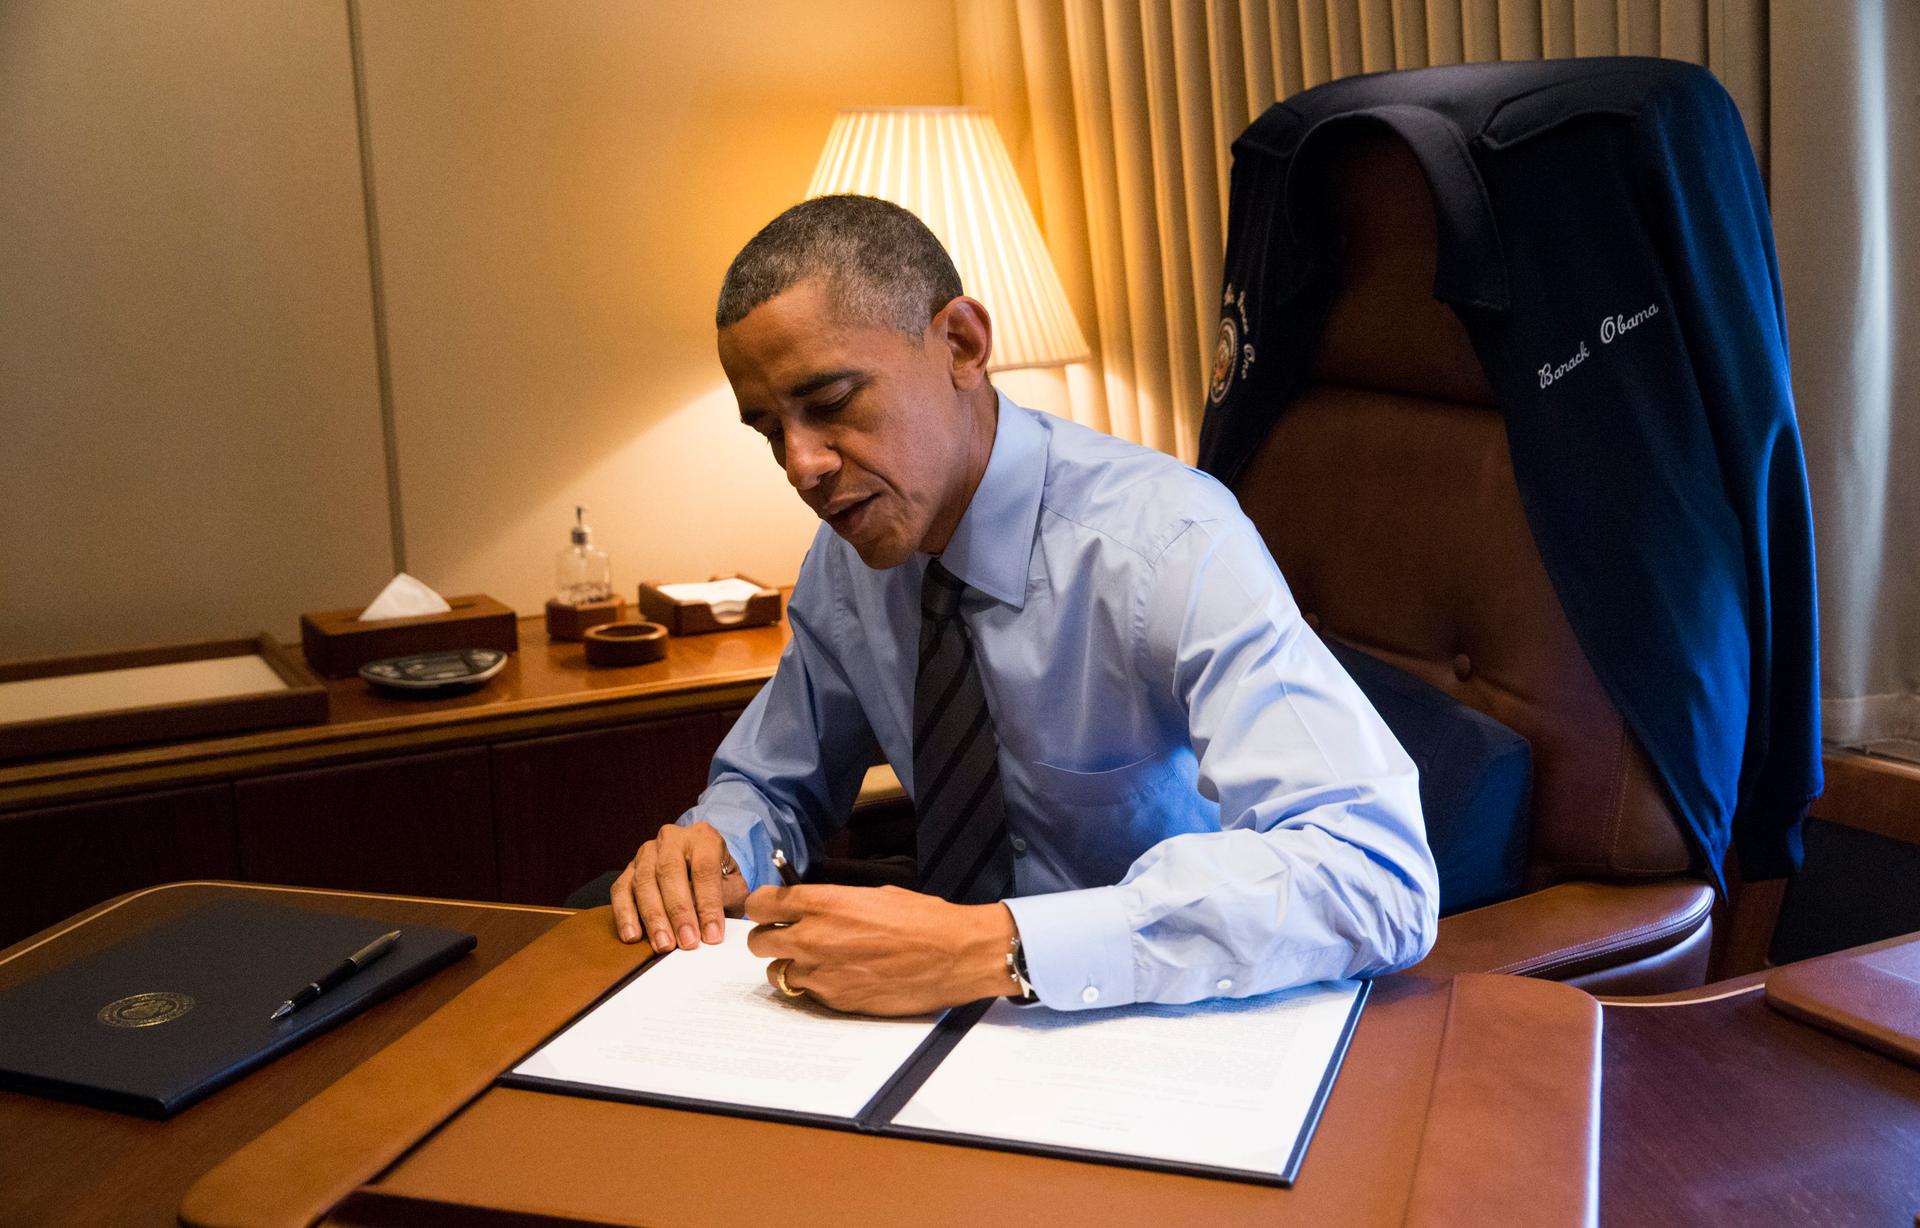 President Barack Obama signs two Presidential Memoranda associated with his Executive Actions on immigration aboard Air Force One on November 21, 2014.